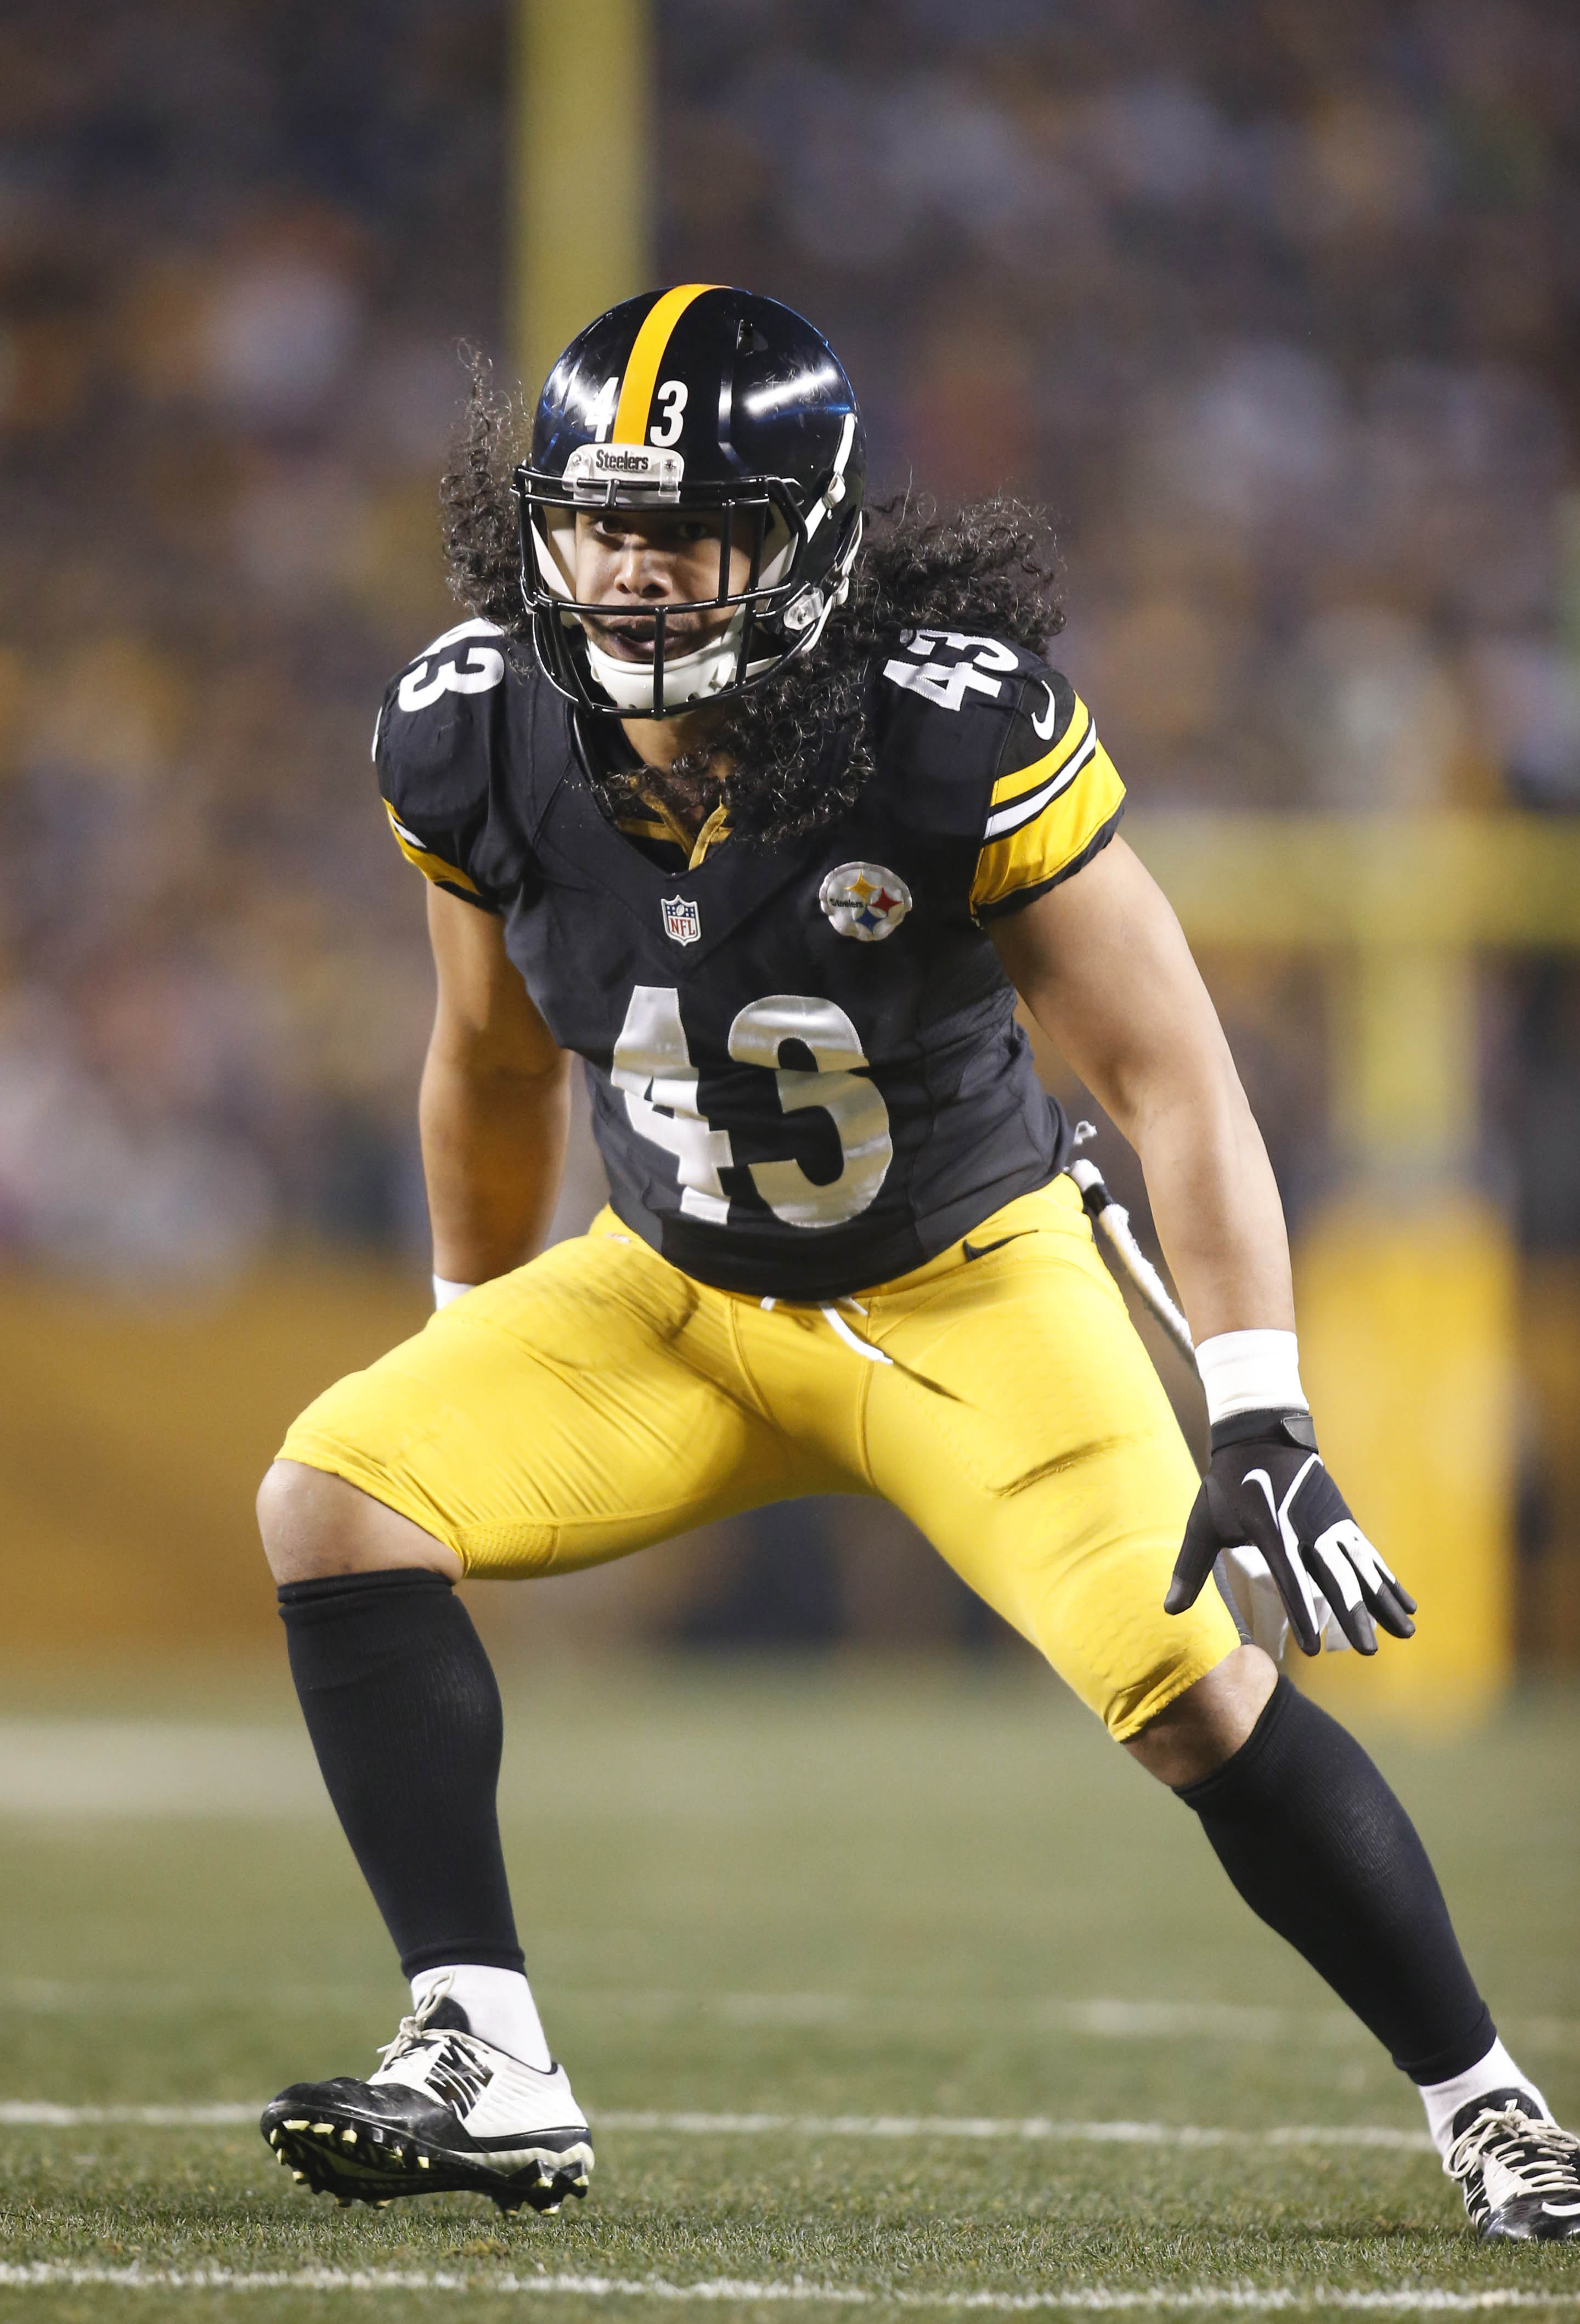 Troy Polamalu Wallpapers High Quality | Download Free2880 x 4236